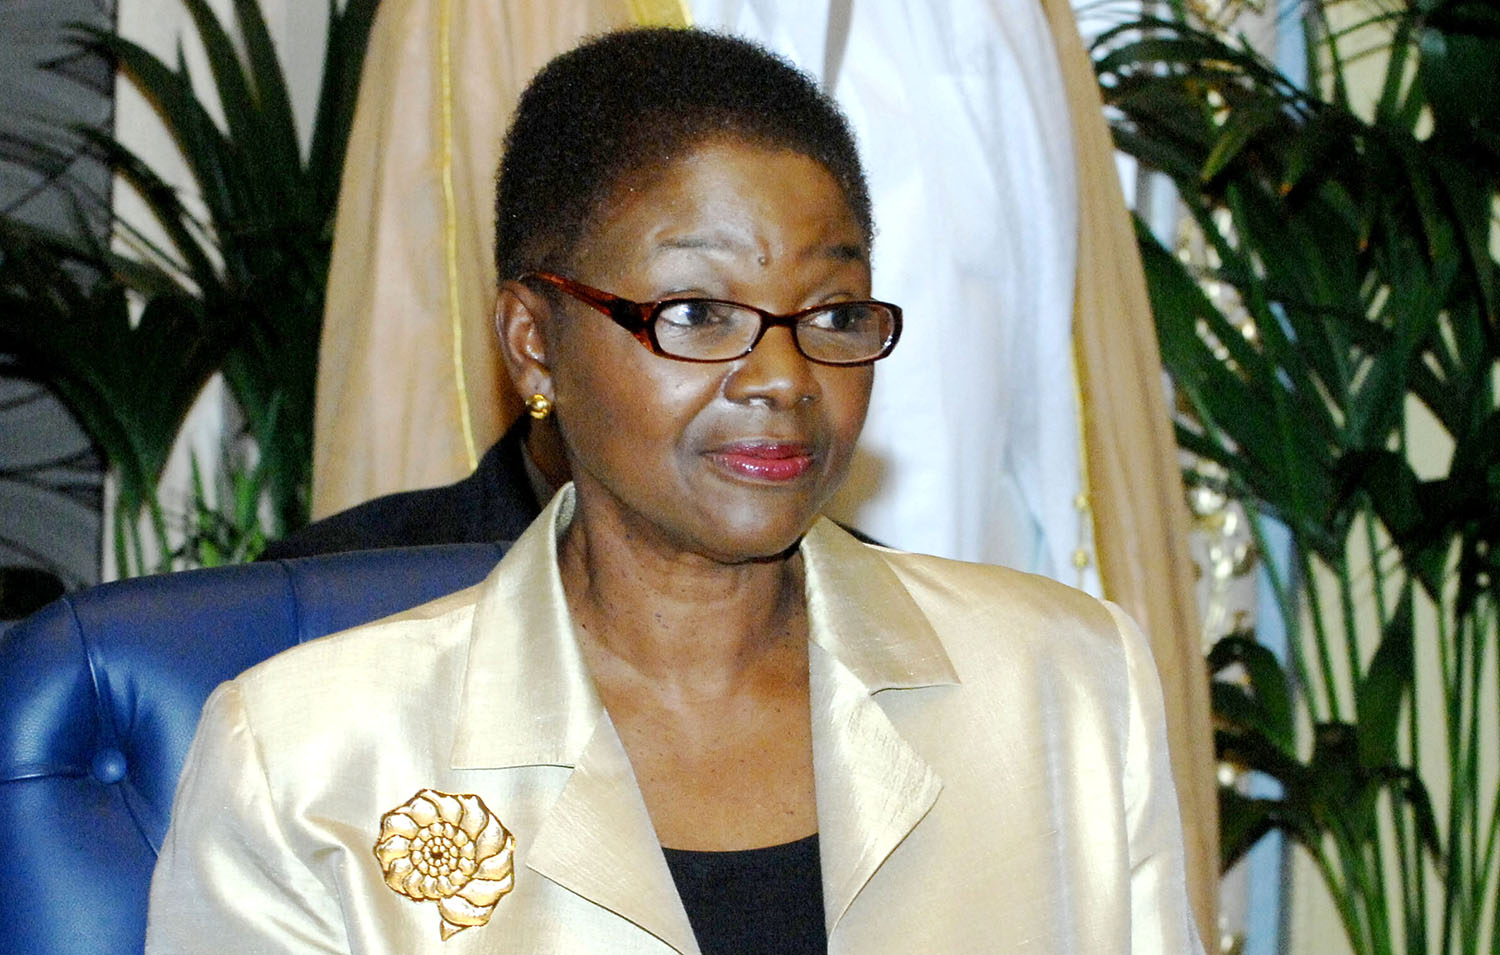 UN Under Secretary General for Humanitarian Affairs and Emergency Relief coordinator Valerie Amos